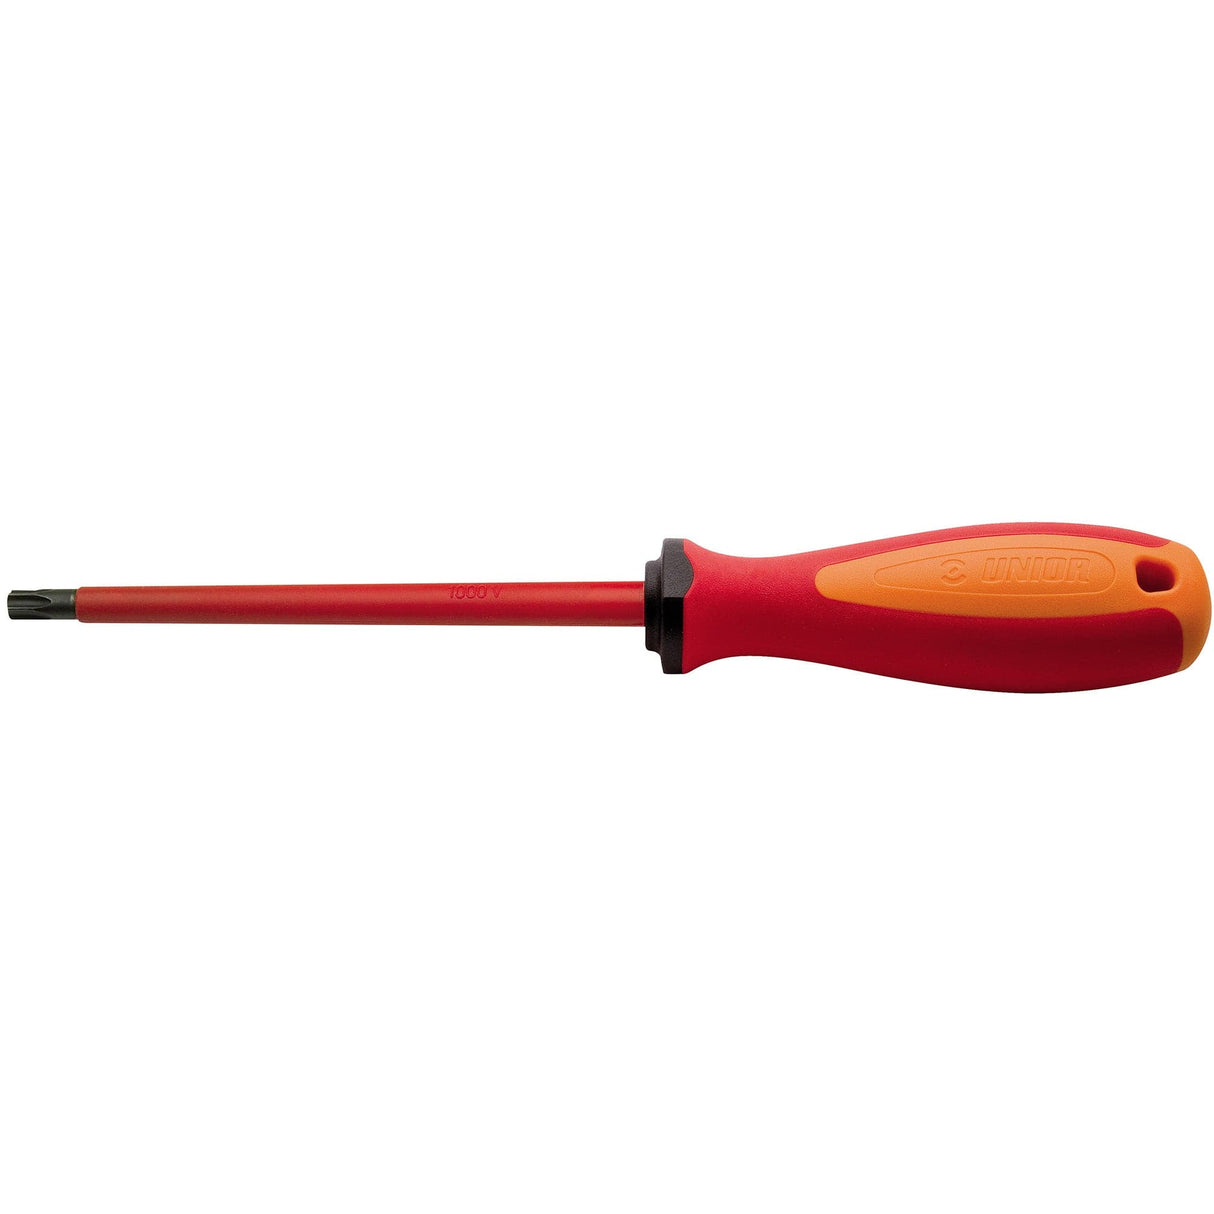 Unior Screwdriver Tbi With Tx Profile And Hole: Red Tr 10